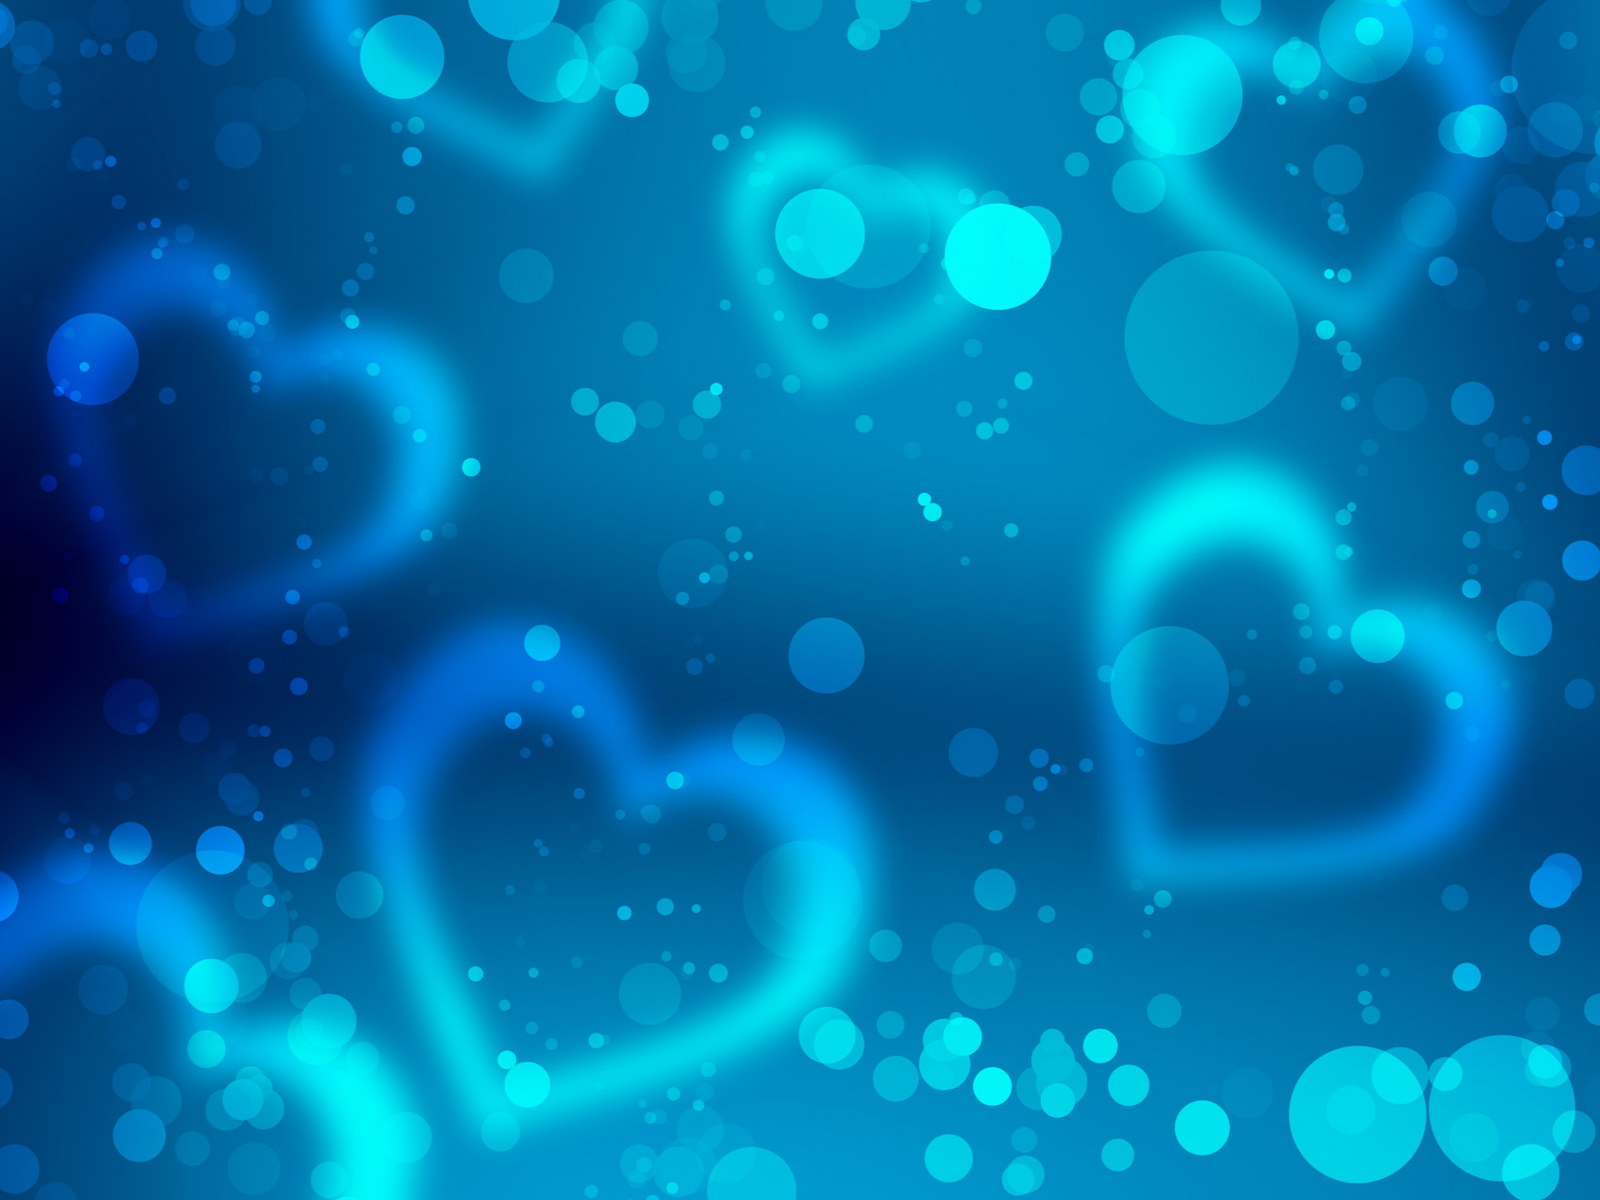 To Blue Hearts Wallpaper Click On Full Size And Then Right